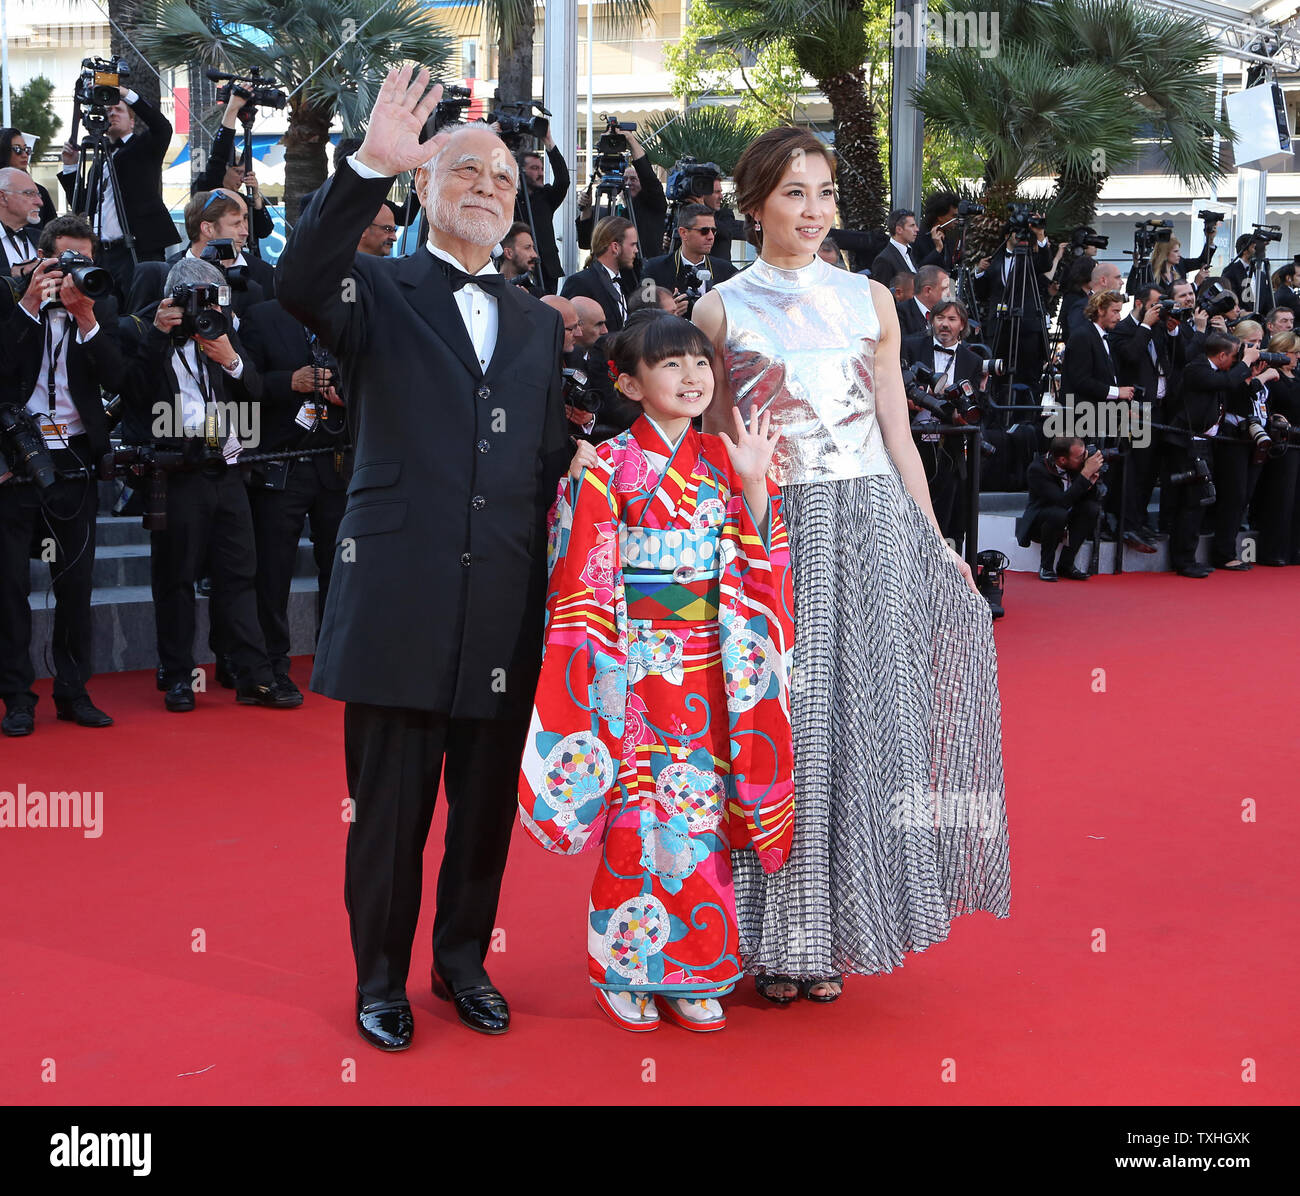 Masahiko Tsugawa (L), Rio Suzuki (C) and Asaka Seto arrive on the red carpet before the screening of the film 'The Little Prince' during the 68th annual Cannes International Film Festival in Cannes, France on May 22, 2015.  Photo by David Silpa/UPI Stock Photo